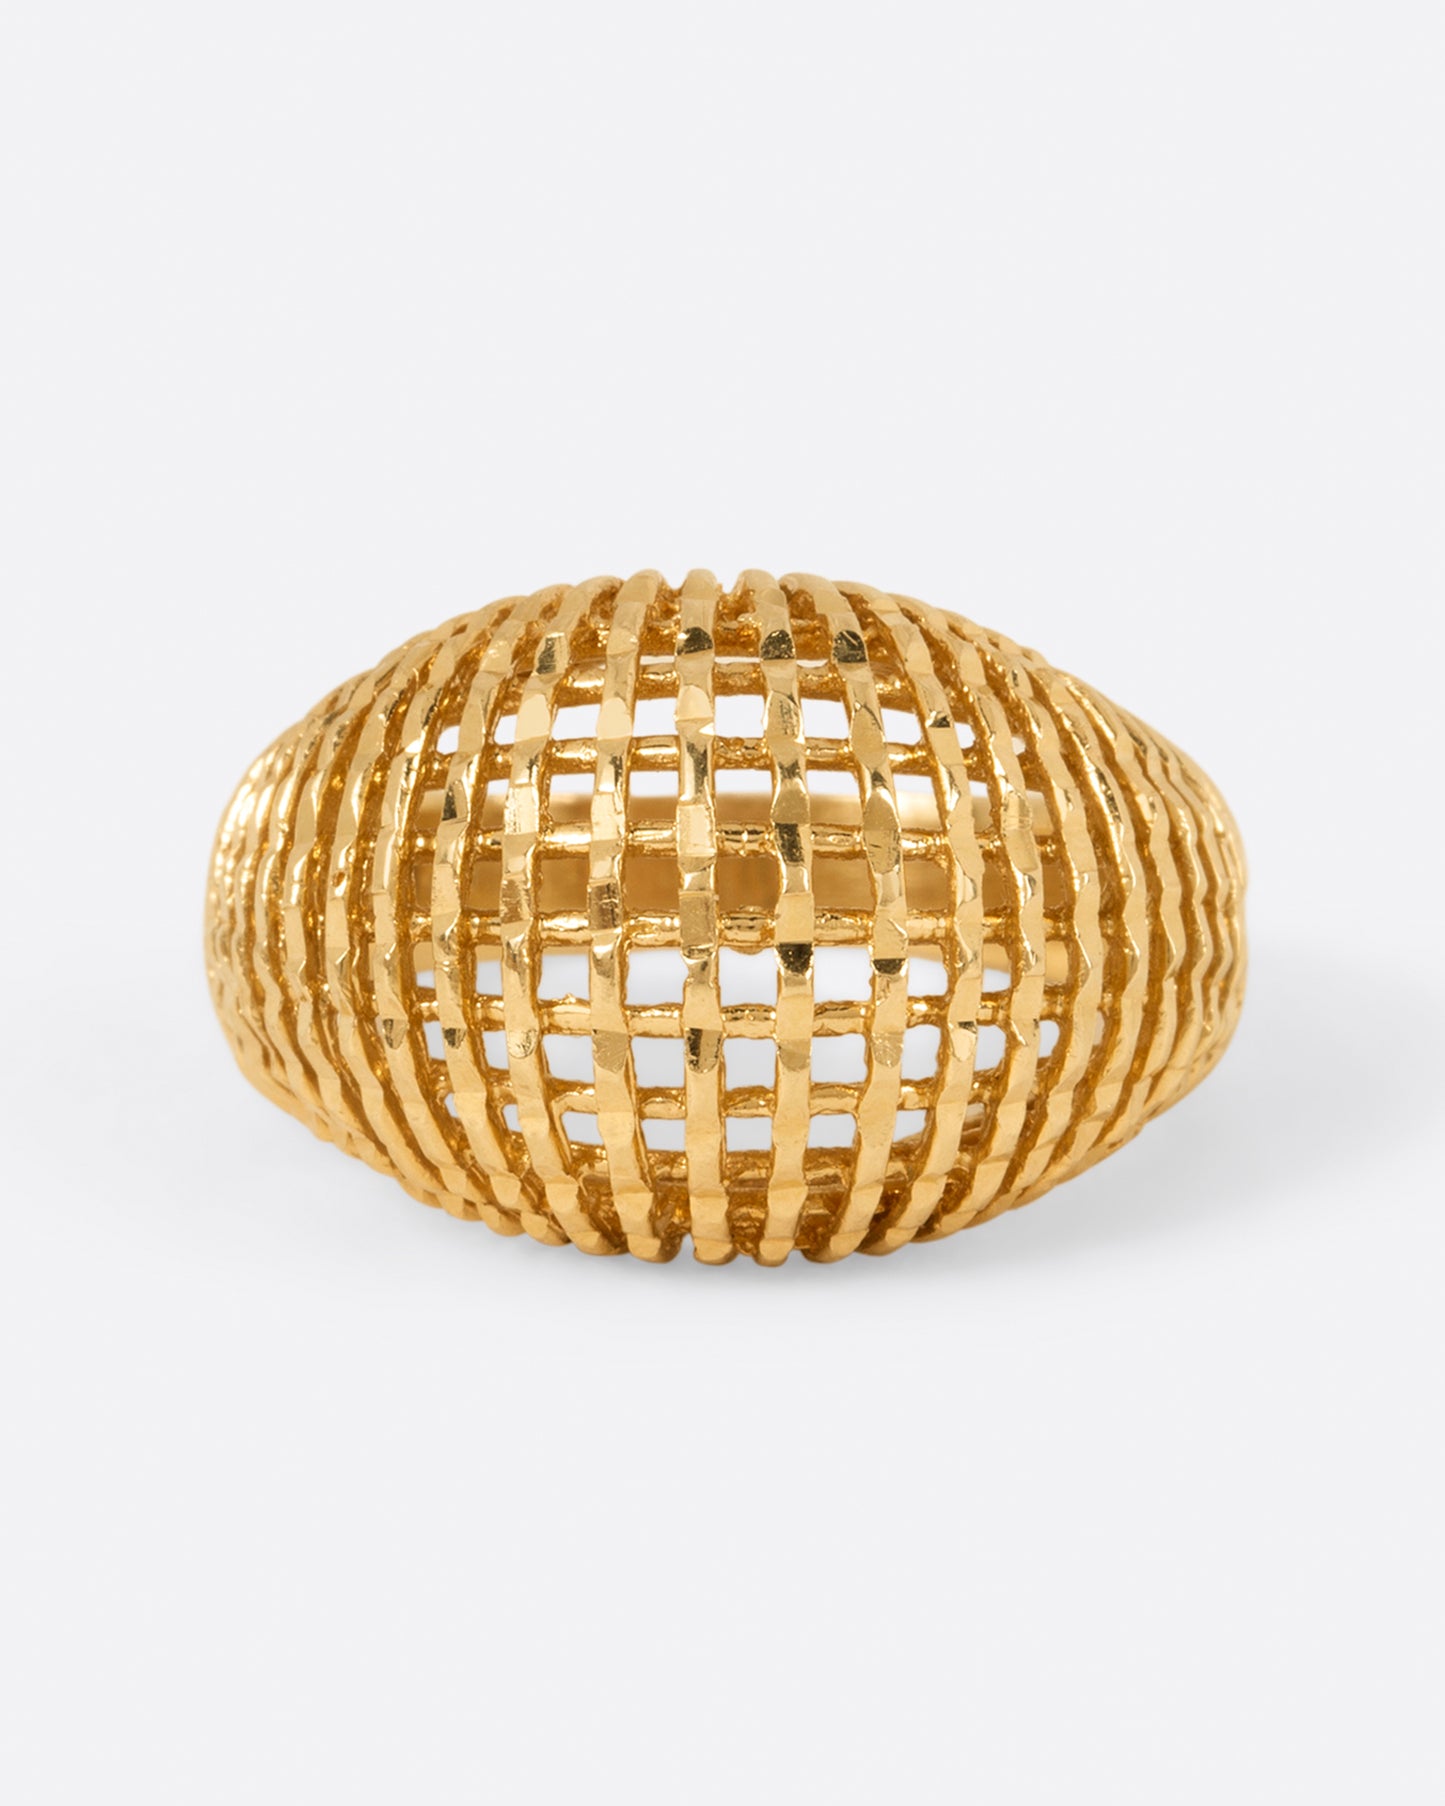 A woven yellow gold dome ring, shown from the front.